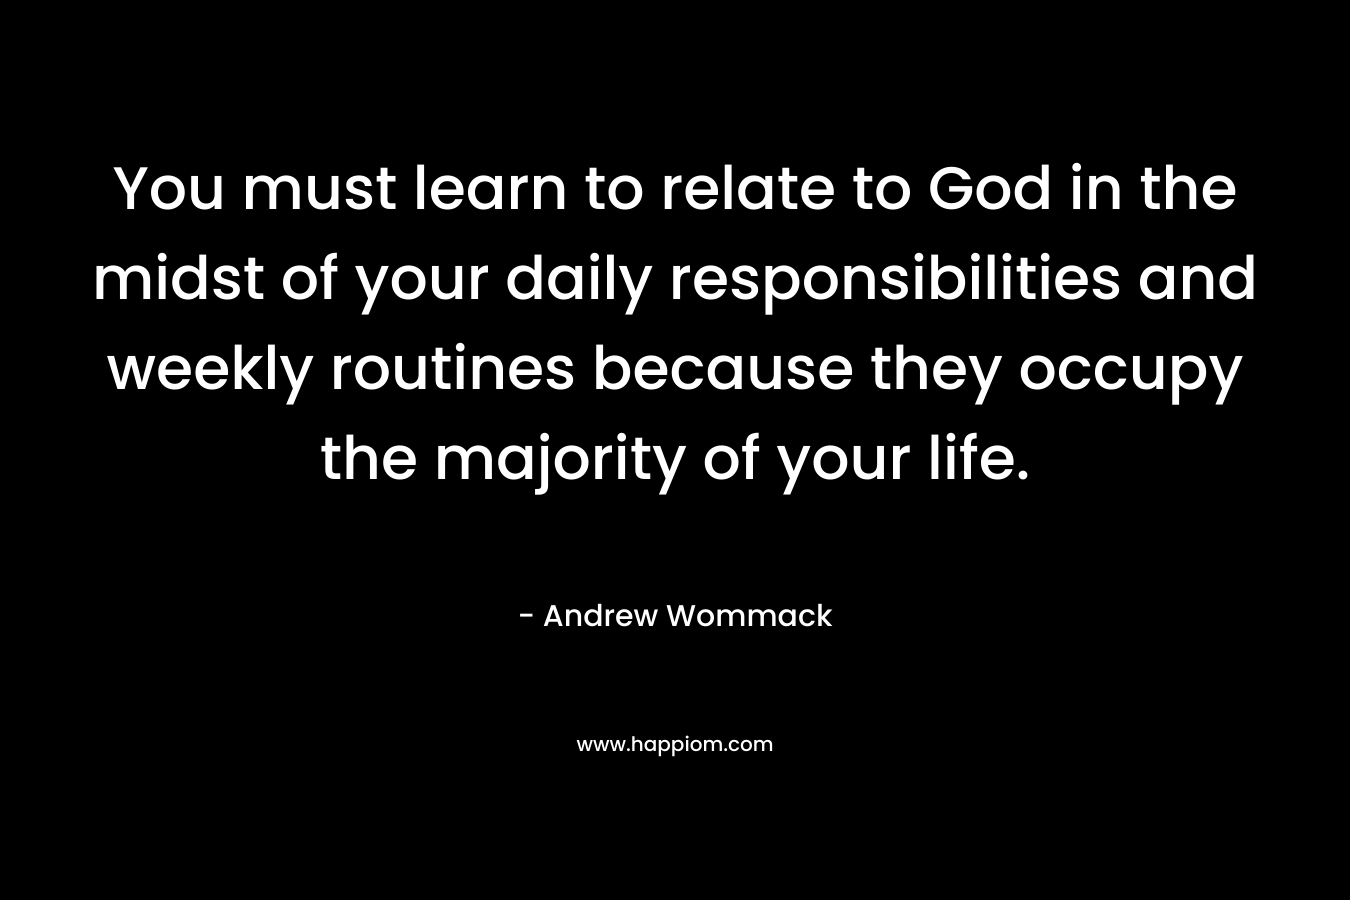 You must learn to relate to God in the midst of your daily responsibilities and weekly routines because they occupy the majority of your life. – Andrew Wommack